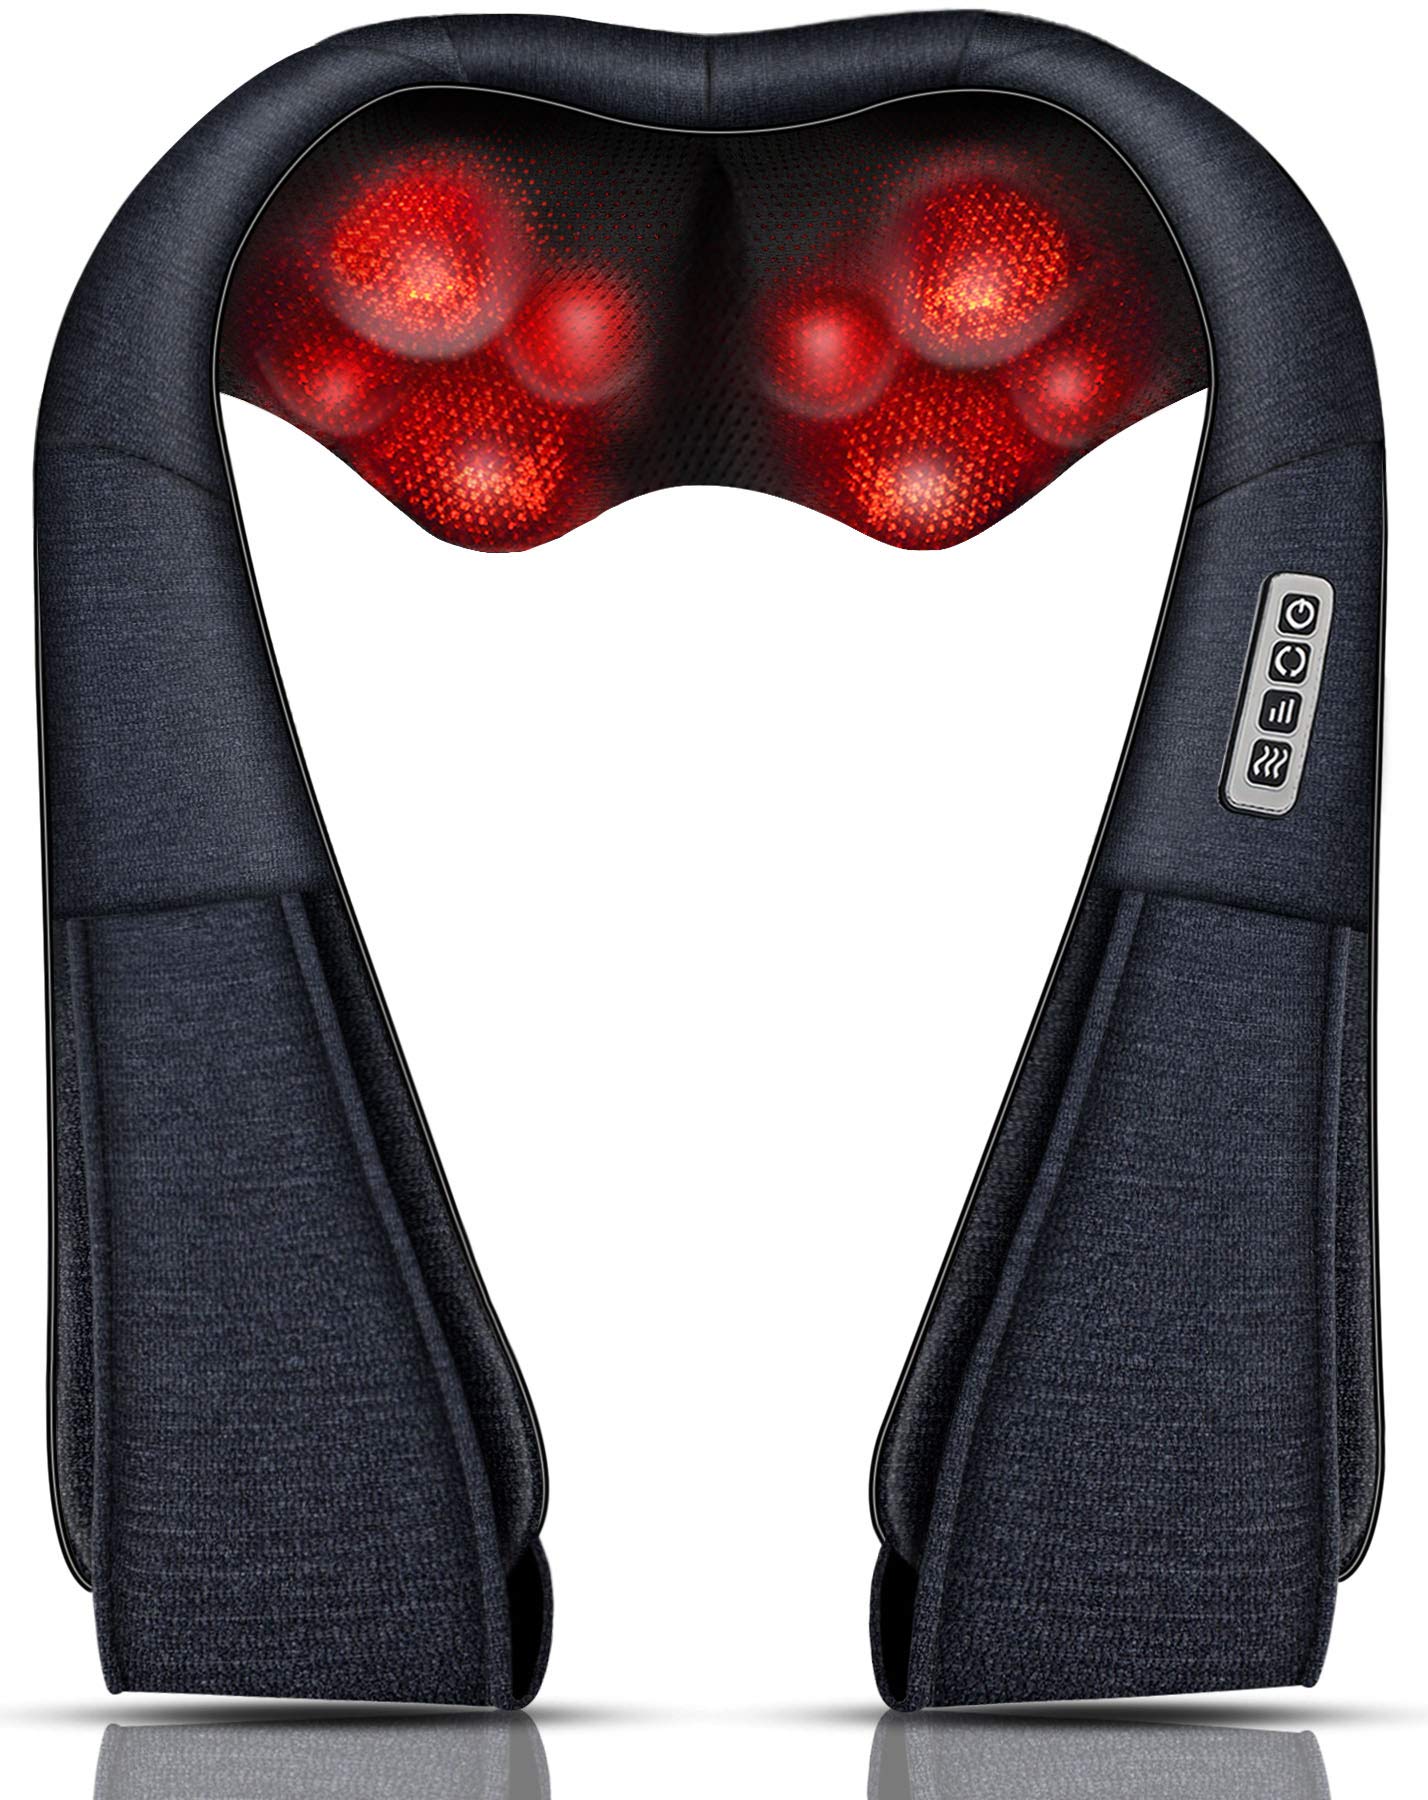 Best Neck Massager for Pain Relief: My Top 4 Reviews - Cushy Spa